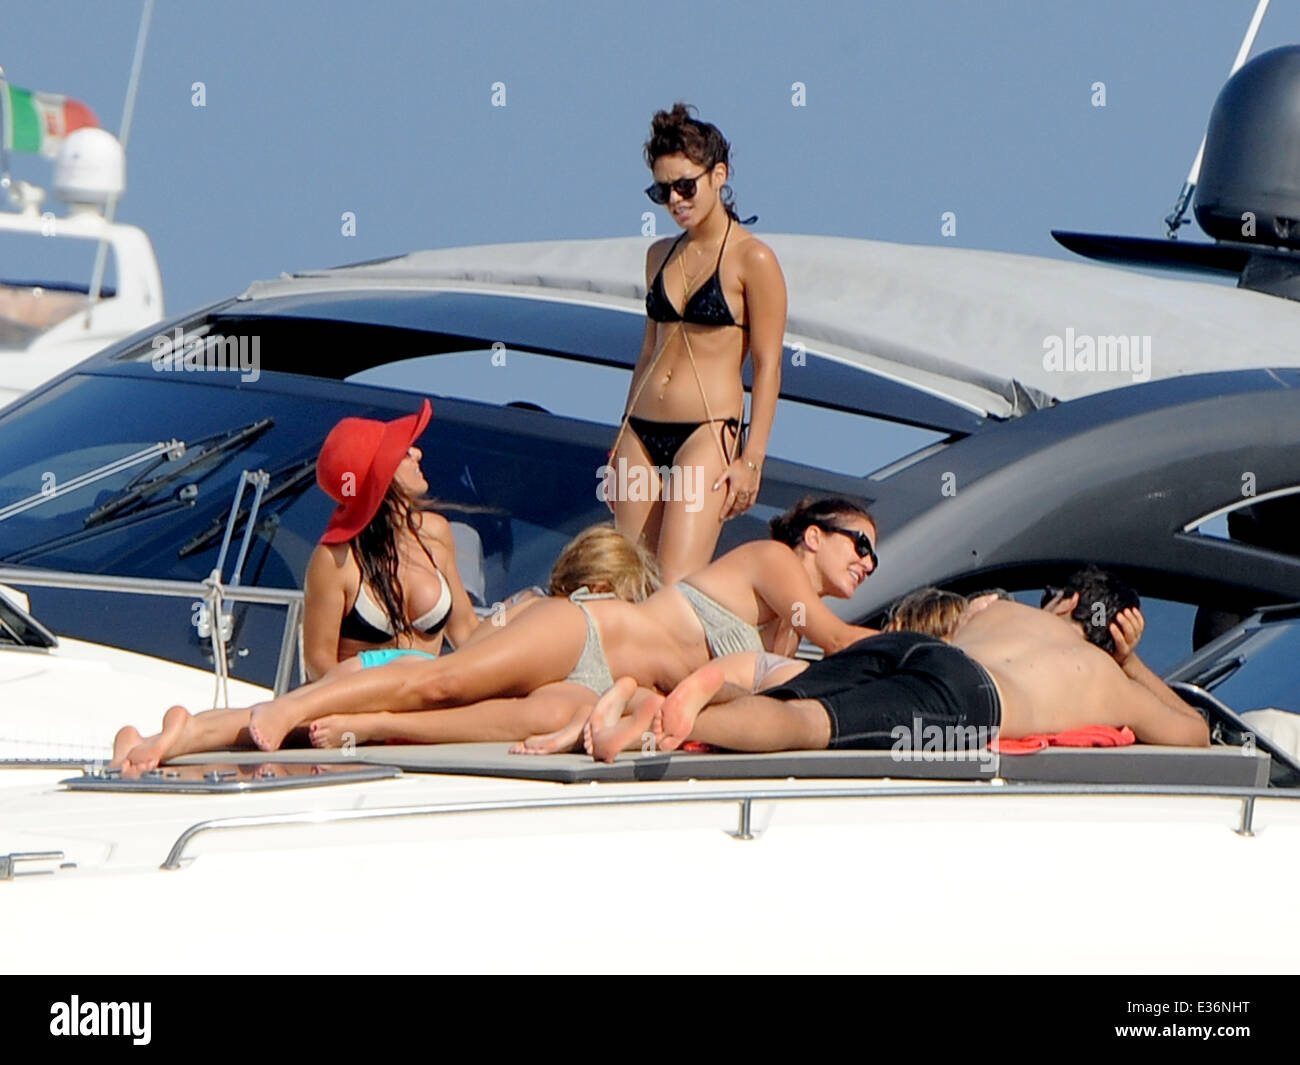 Vanessa Hudgens spends time on a boat with friends, including film directors Eli Roth and Terry Gilliam.  Featuring: Vanessa Hudgens Where: Ischia, Italy When: 19 Jul 2013   **** Stock Photo